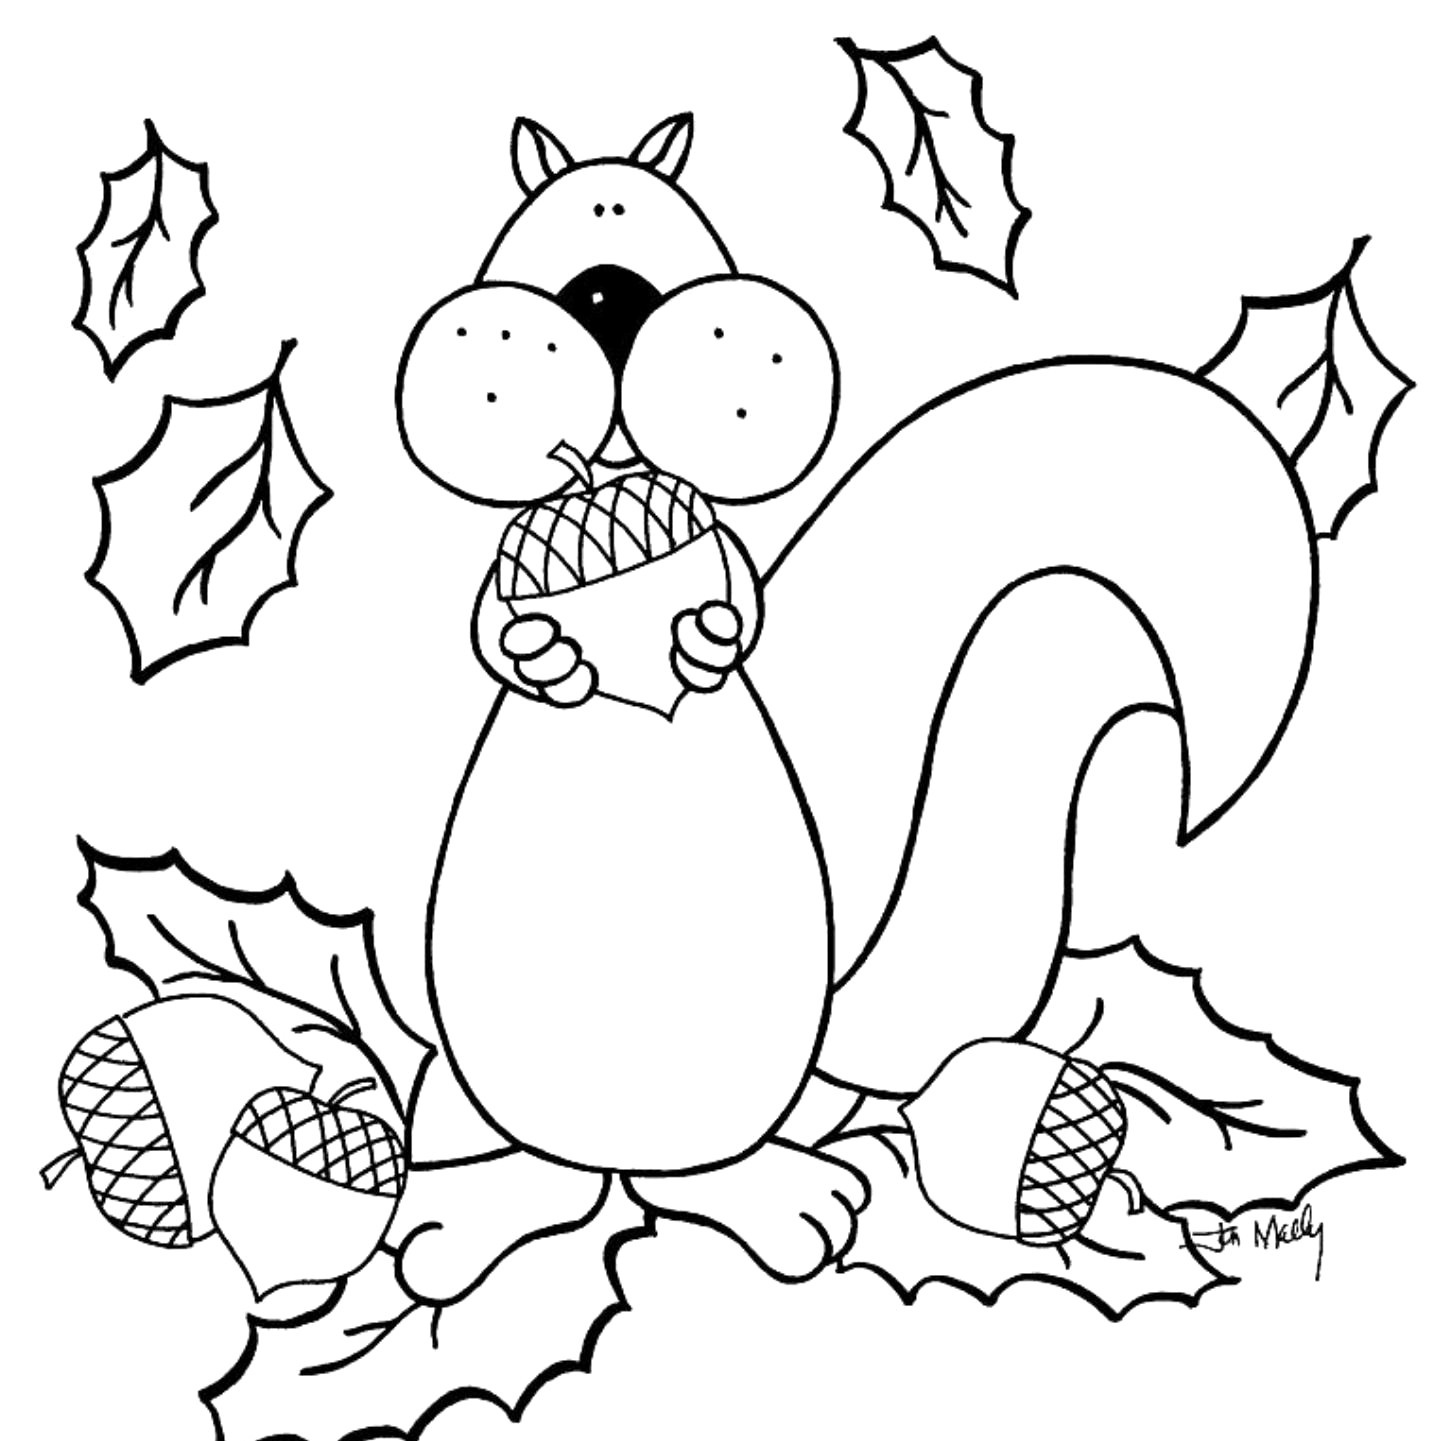 Free Printable Fall Coloring Pages For Kids - Best Coloring Pages - Free Printable Leaf Coloring Pages